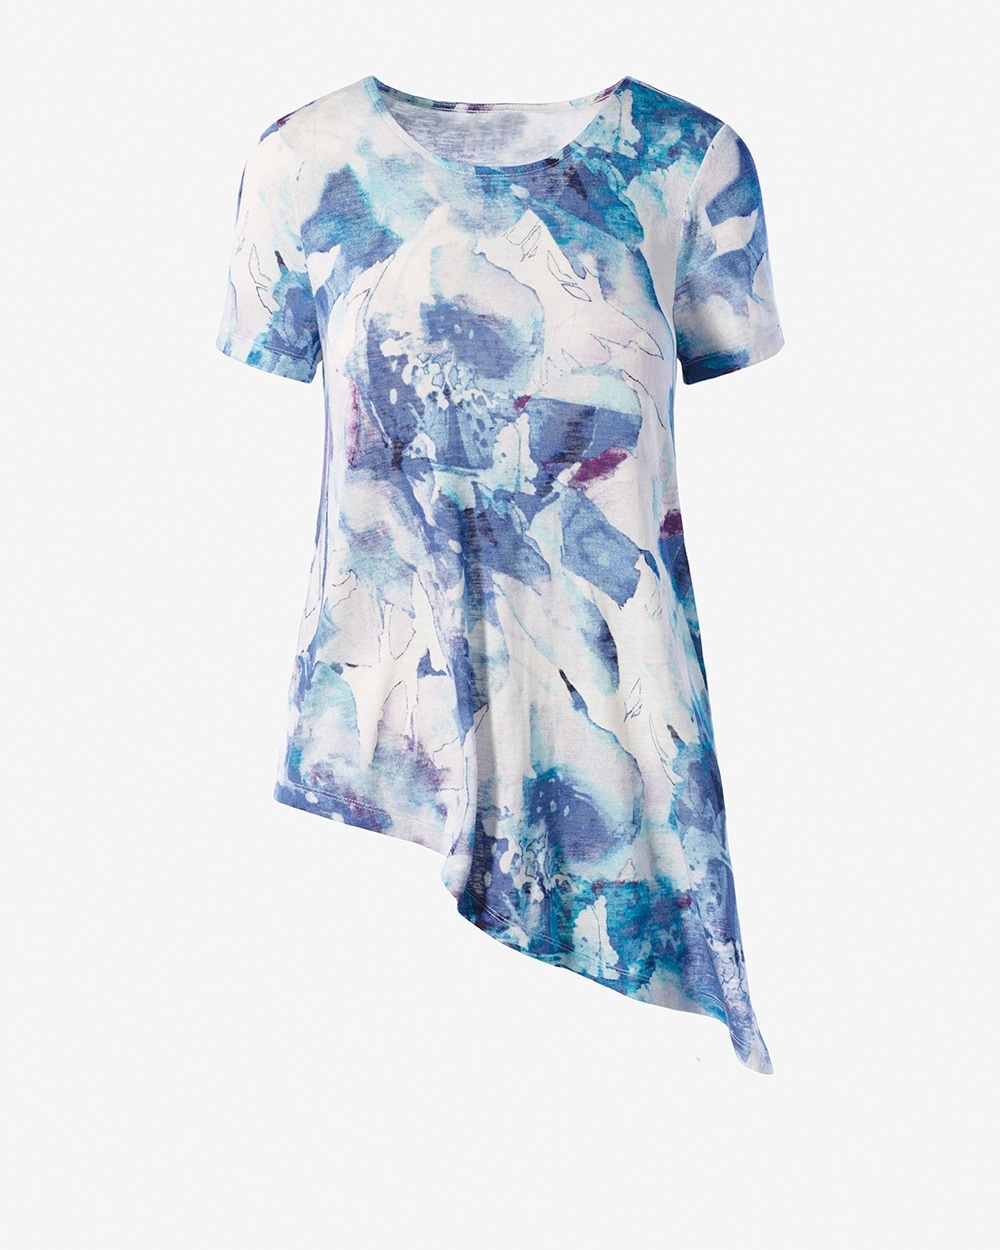 SupremelySoft Ethereal Asymmetrical Side-Tie Tee